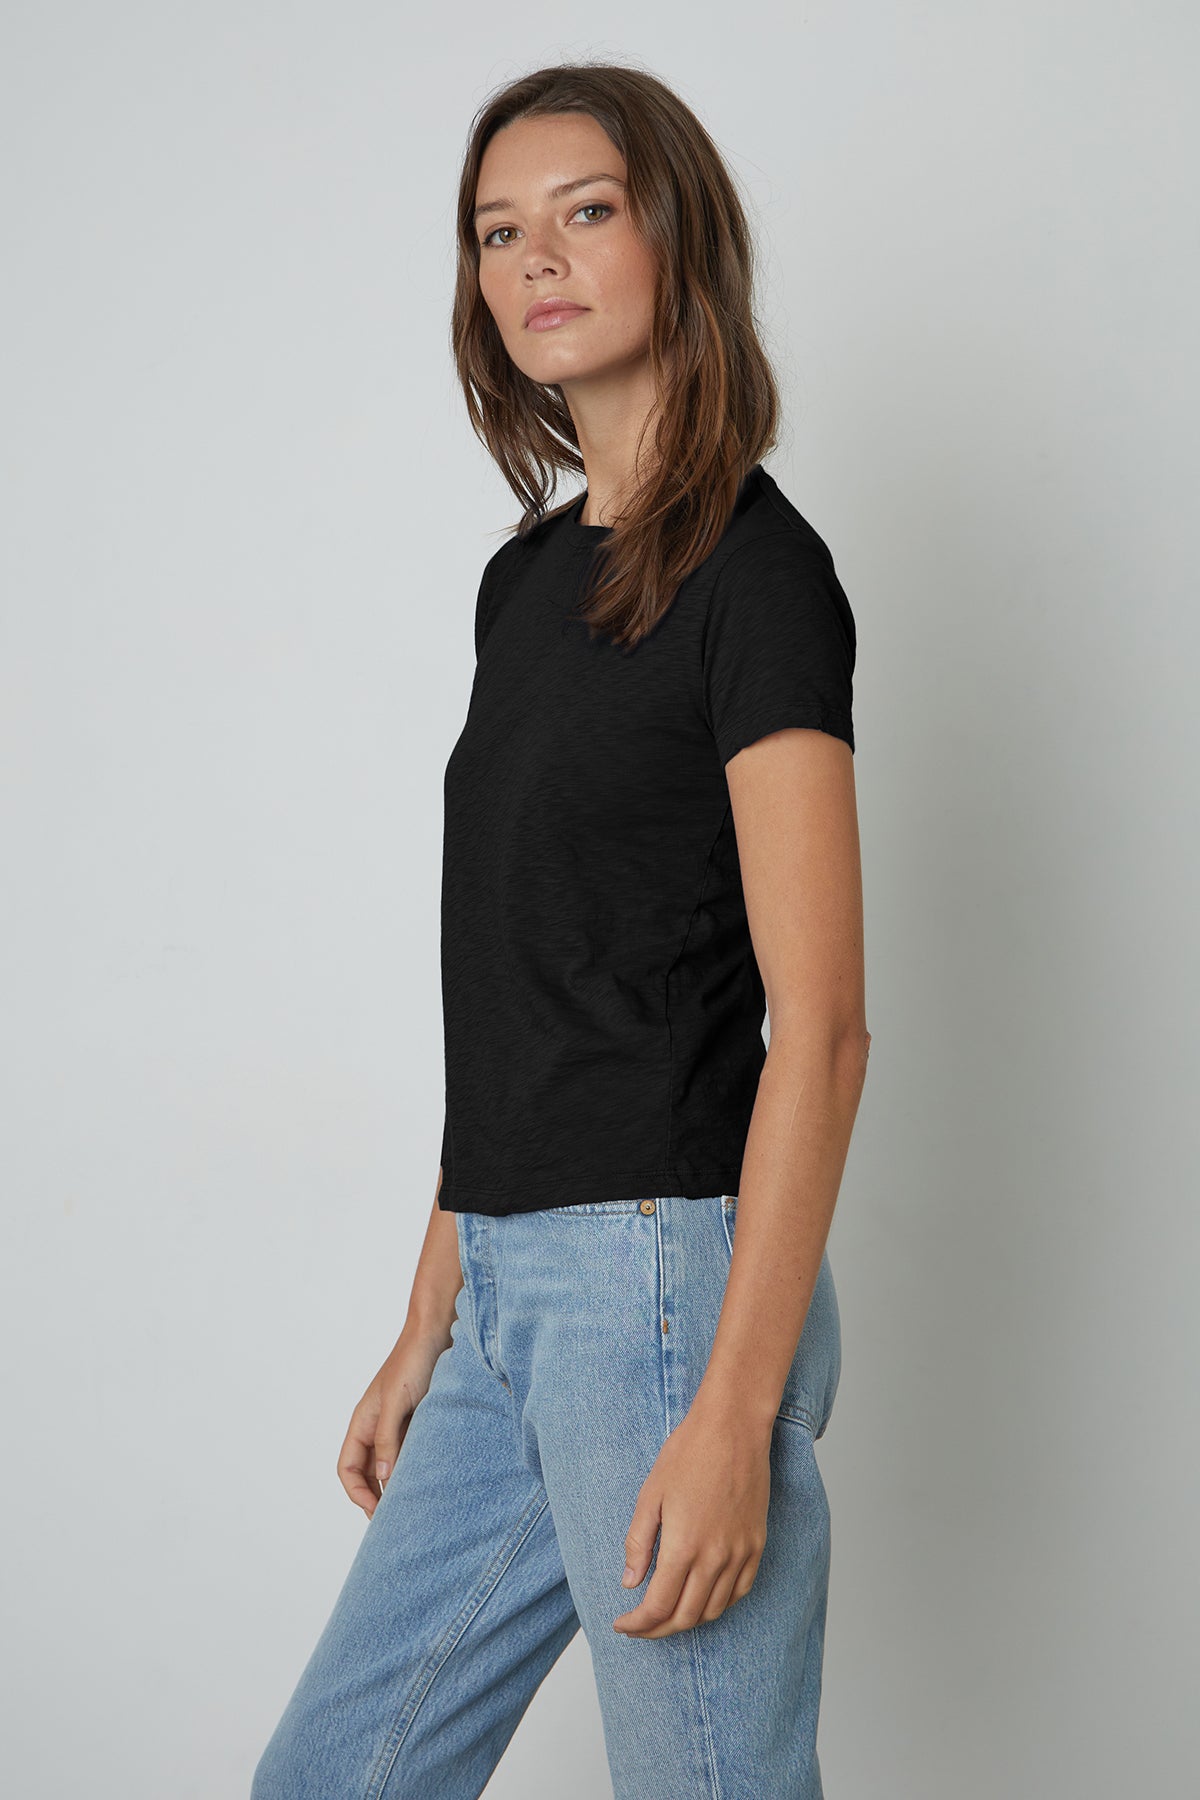   A woman wearing a black SIERRA CREW NECK TEE by Velvet by Graham & Spencer and jeans. 